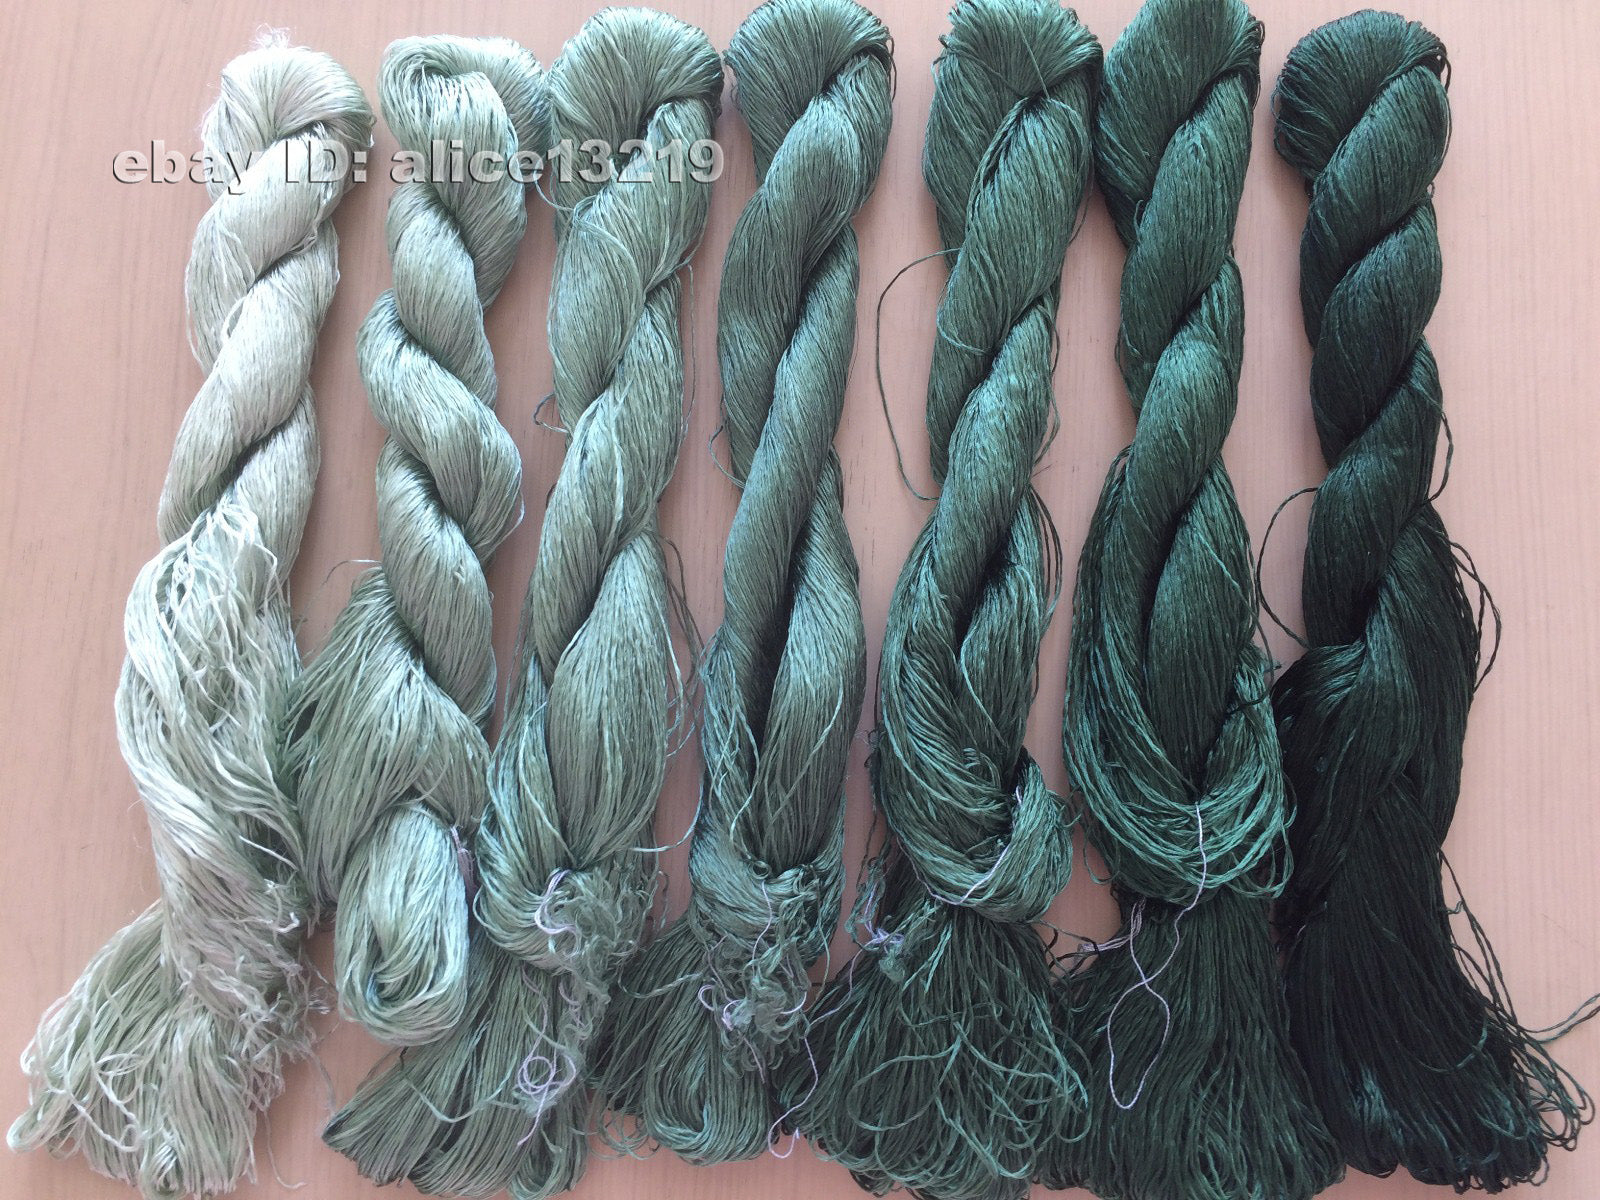 7bundles 100%real mulberry silk,hand-dyed embroidery silk floss/thread N19